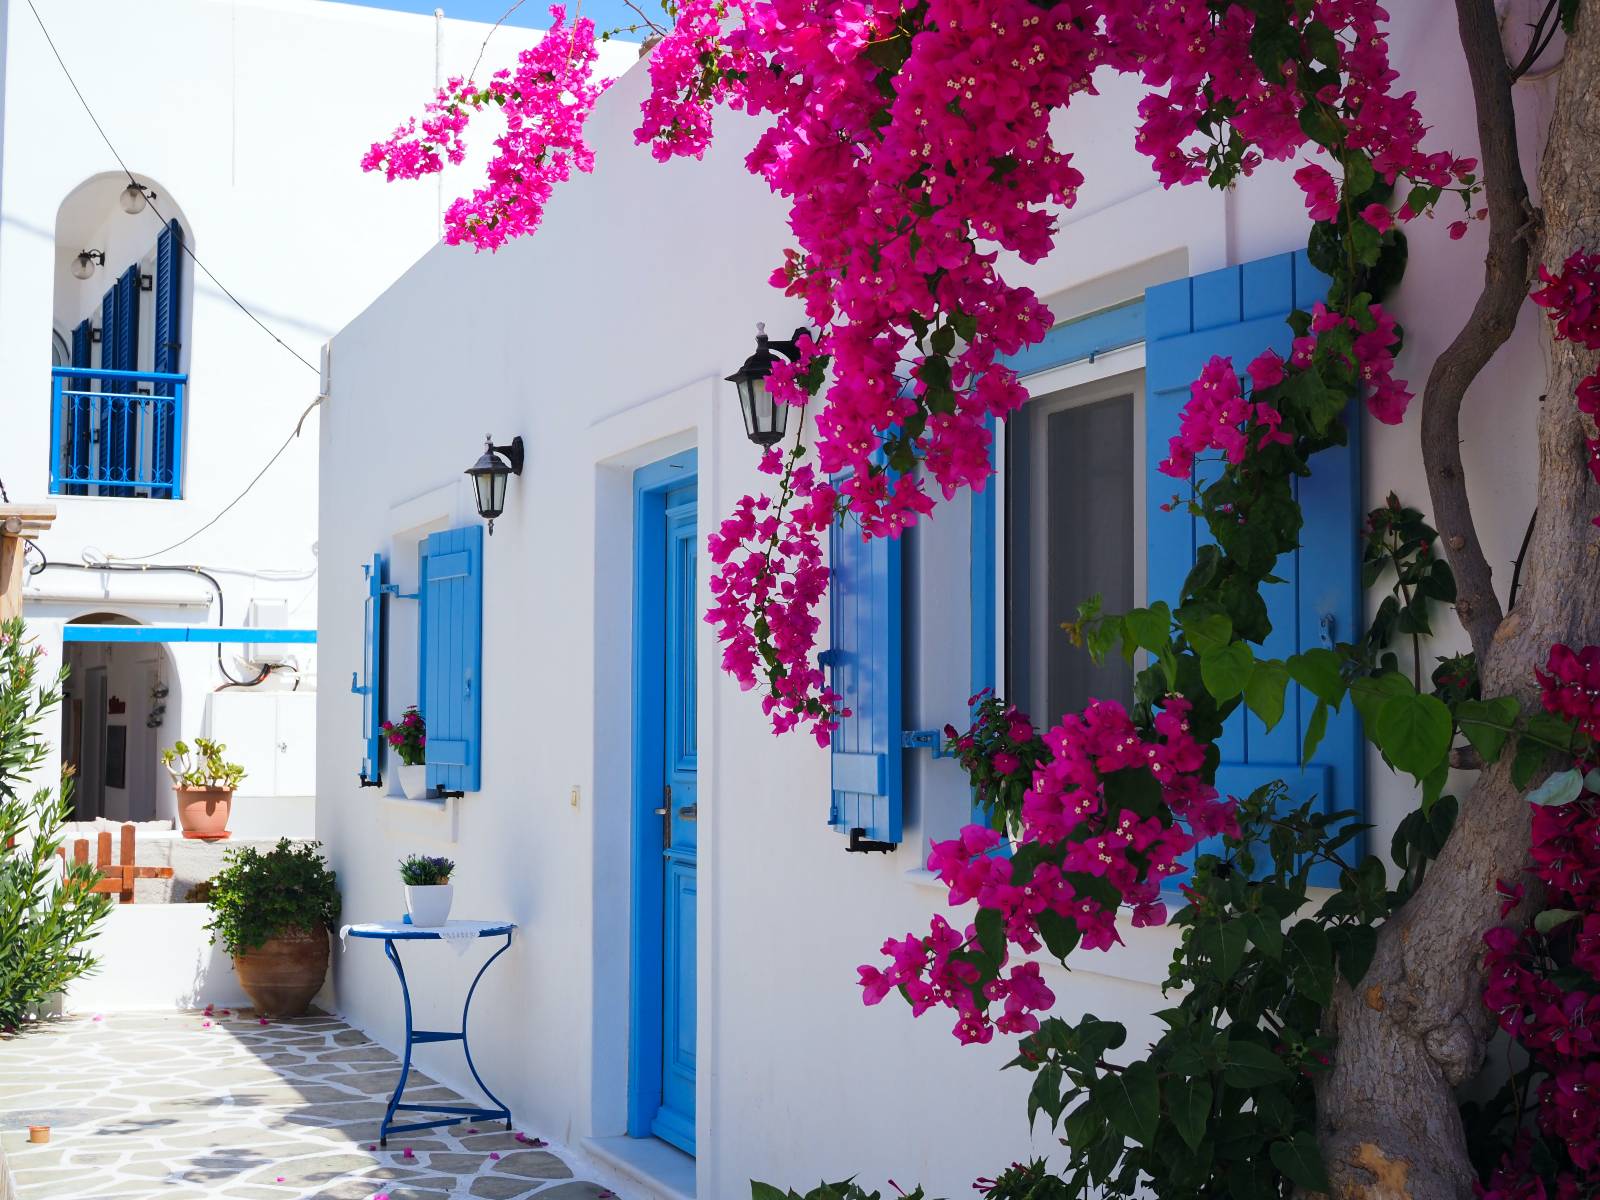 Guide to buying property in Greece